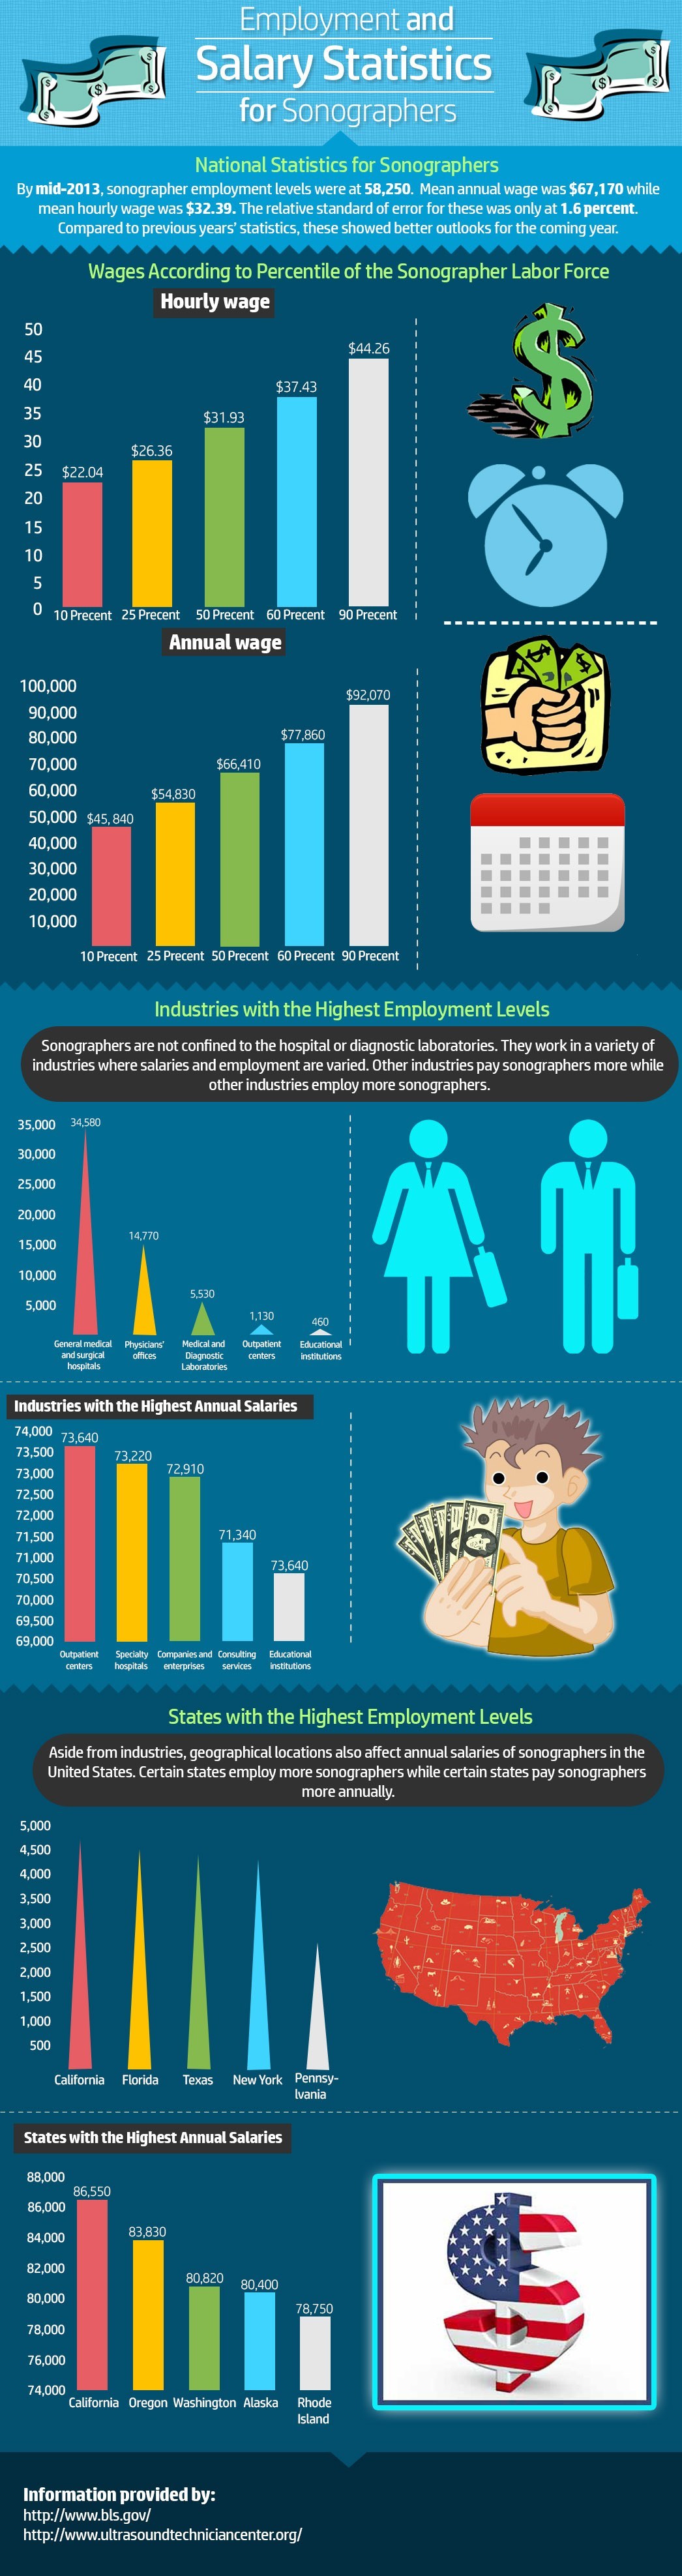 Infographic Employment and Salary Statistics for Sonographers